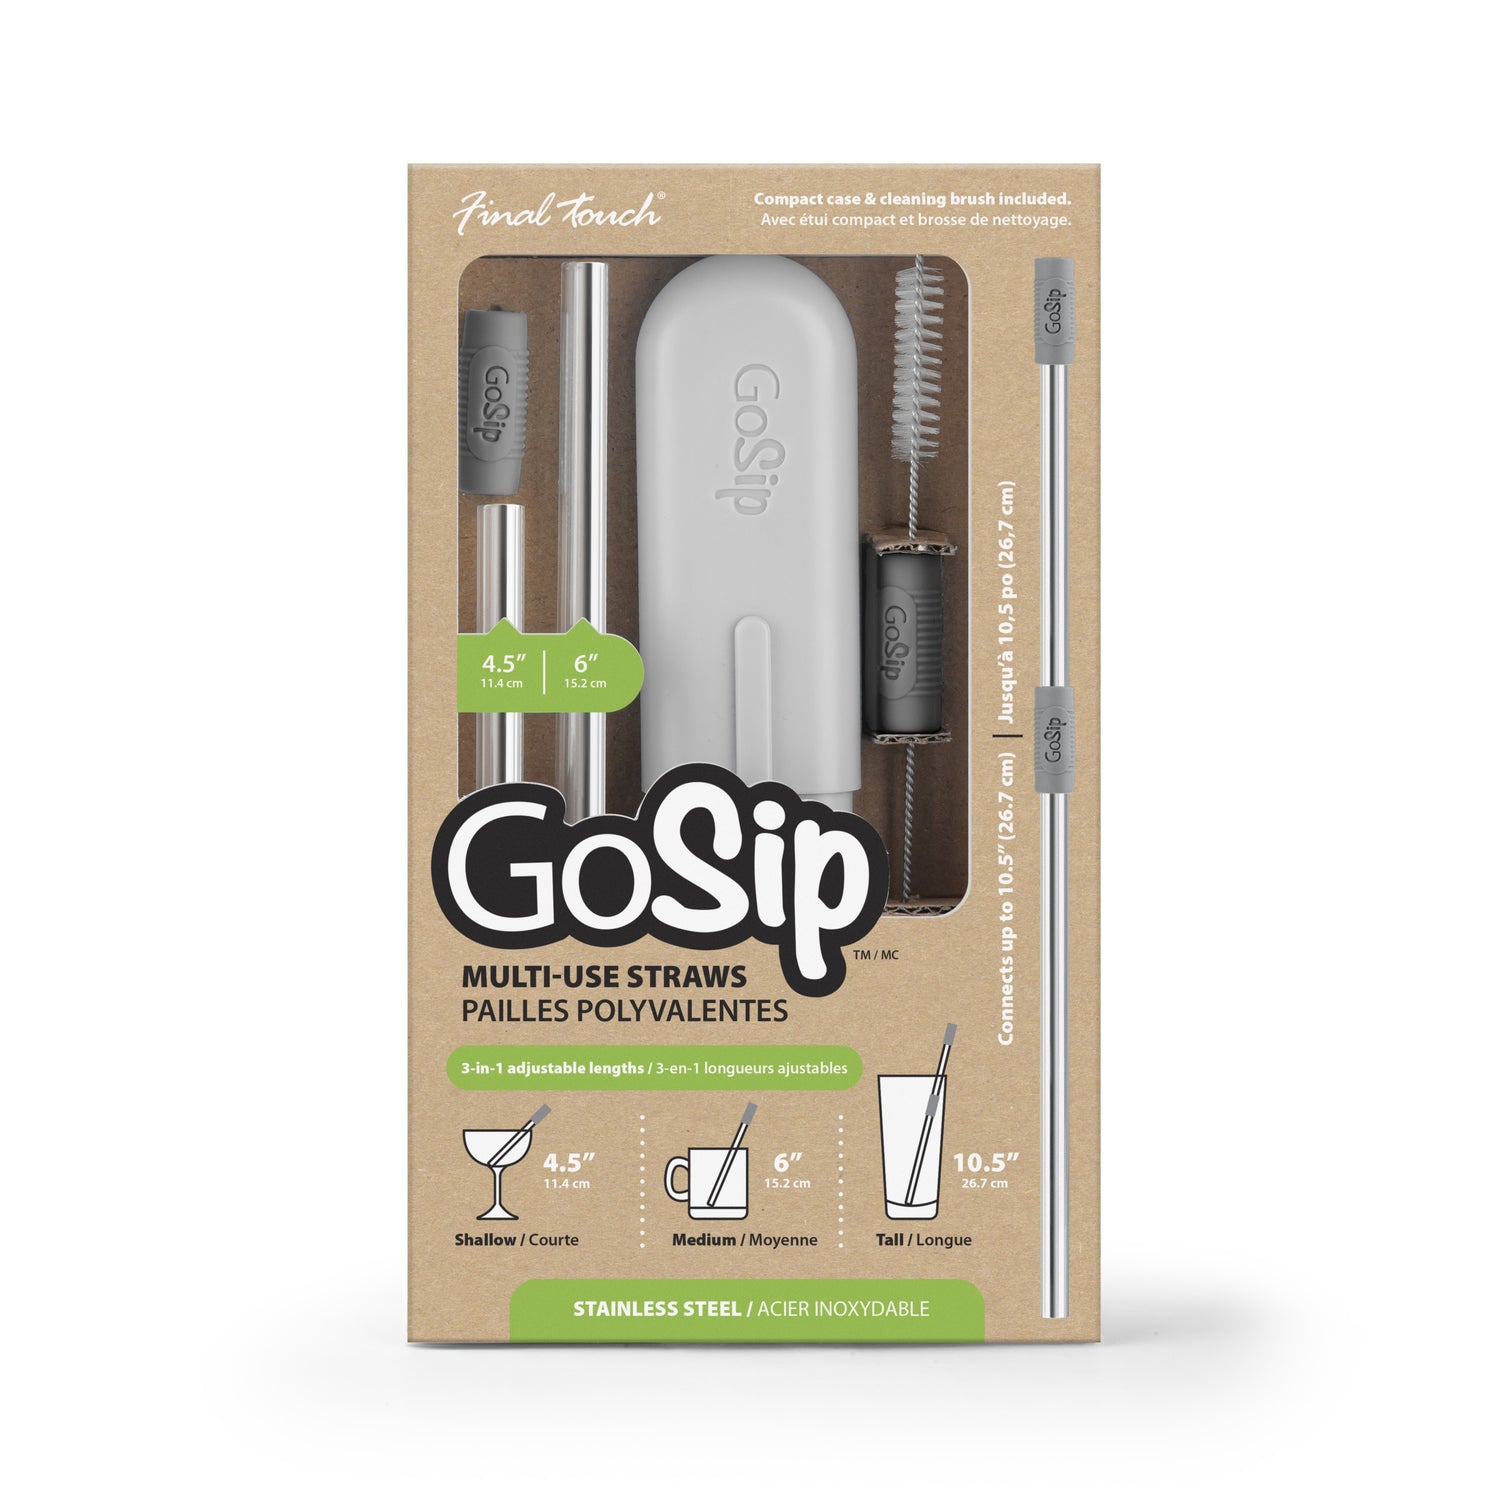 Final Touch GoSip Stainless Steel Adjustable Straws with Cleaning Brush &  Grey Compact Case